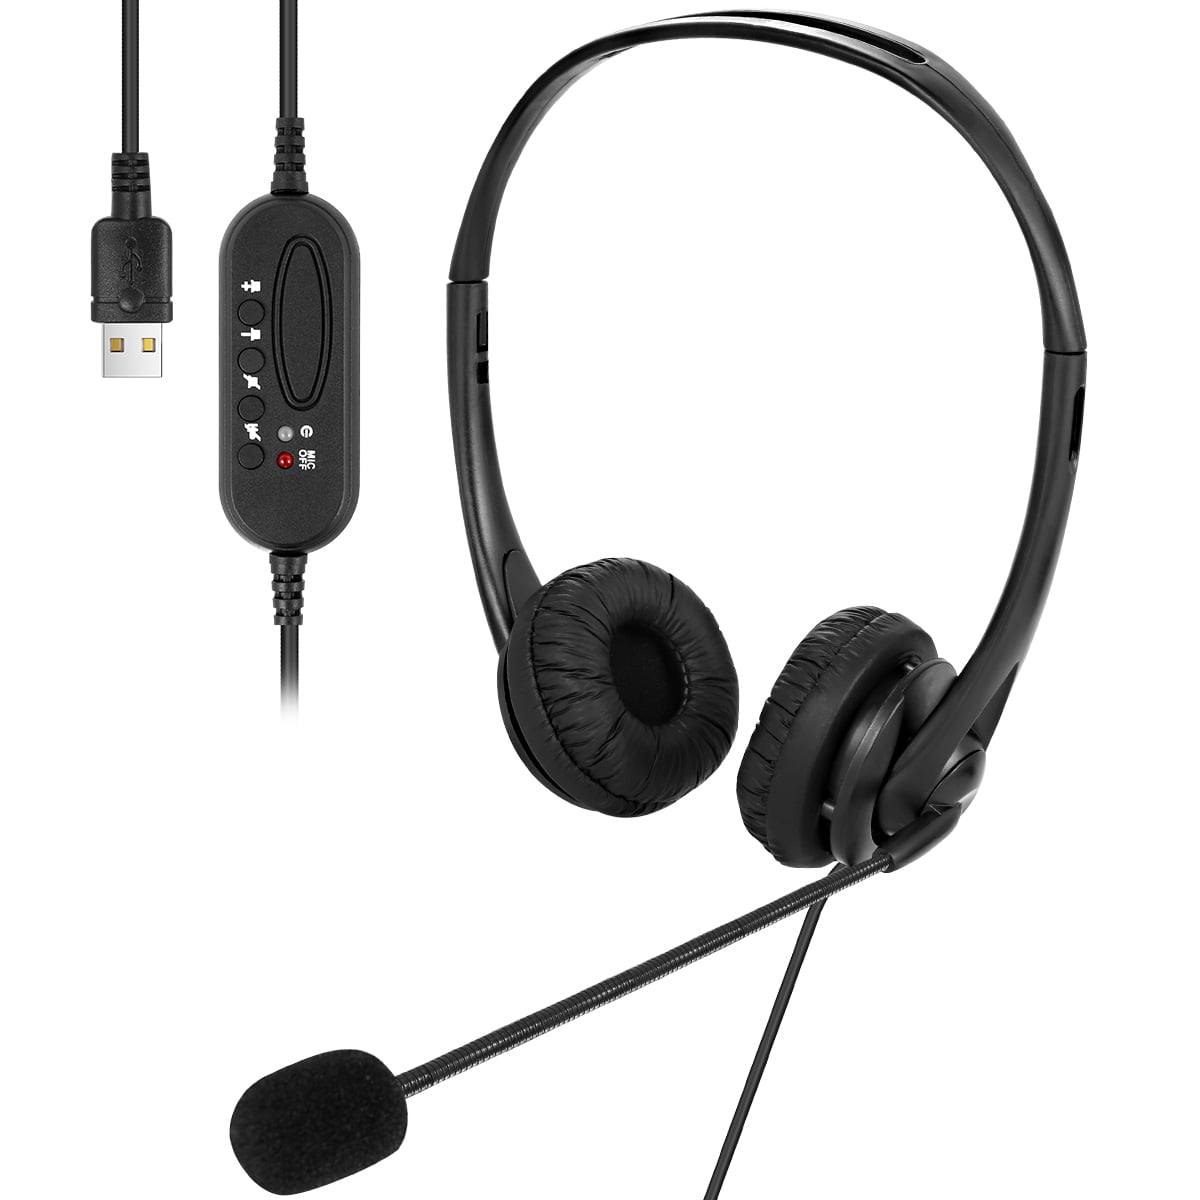 Headset with Microphone USB Wired Headphones Noise Concealing Earphones for PC Laptop Desktop Corded Telephone